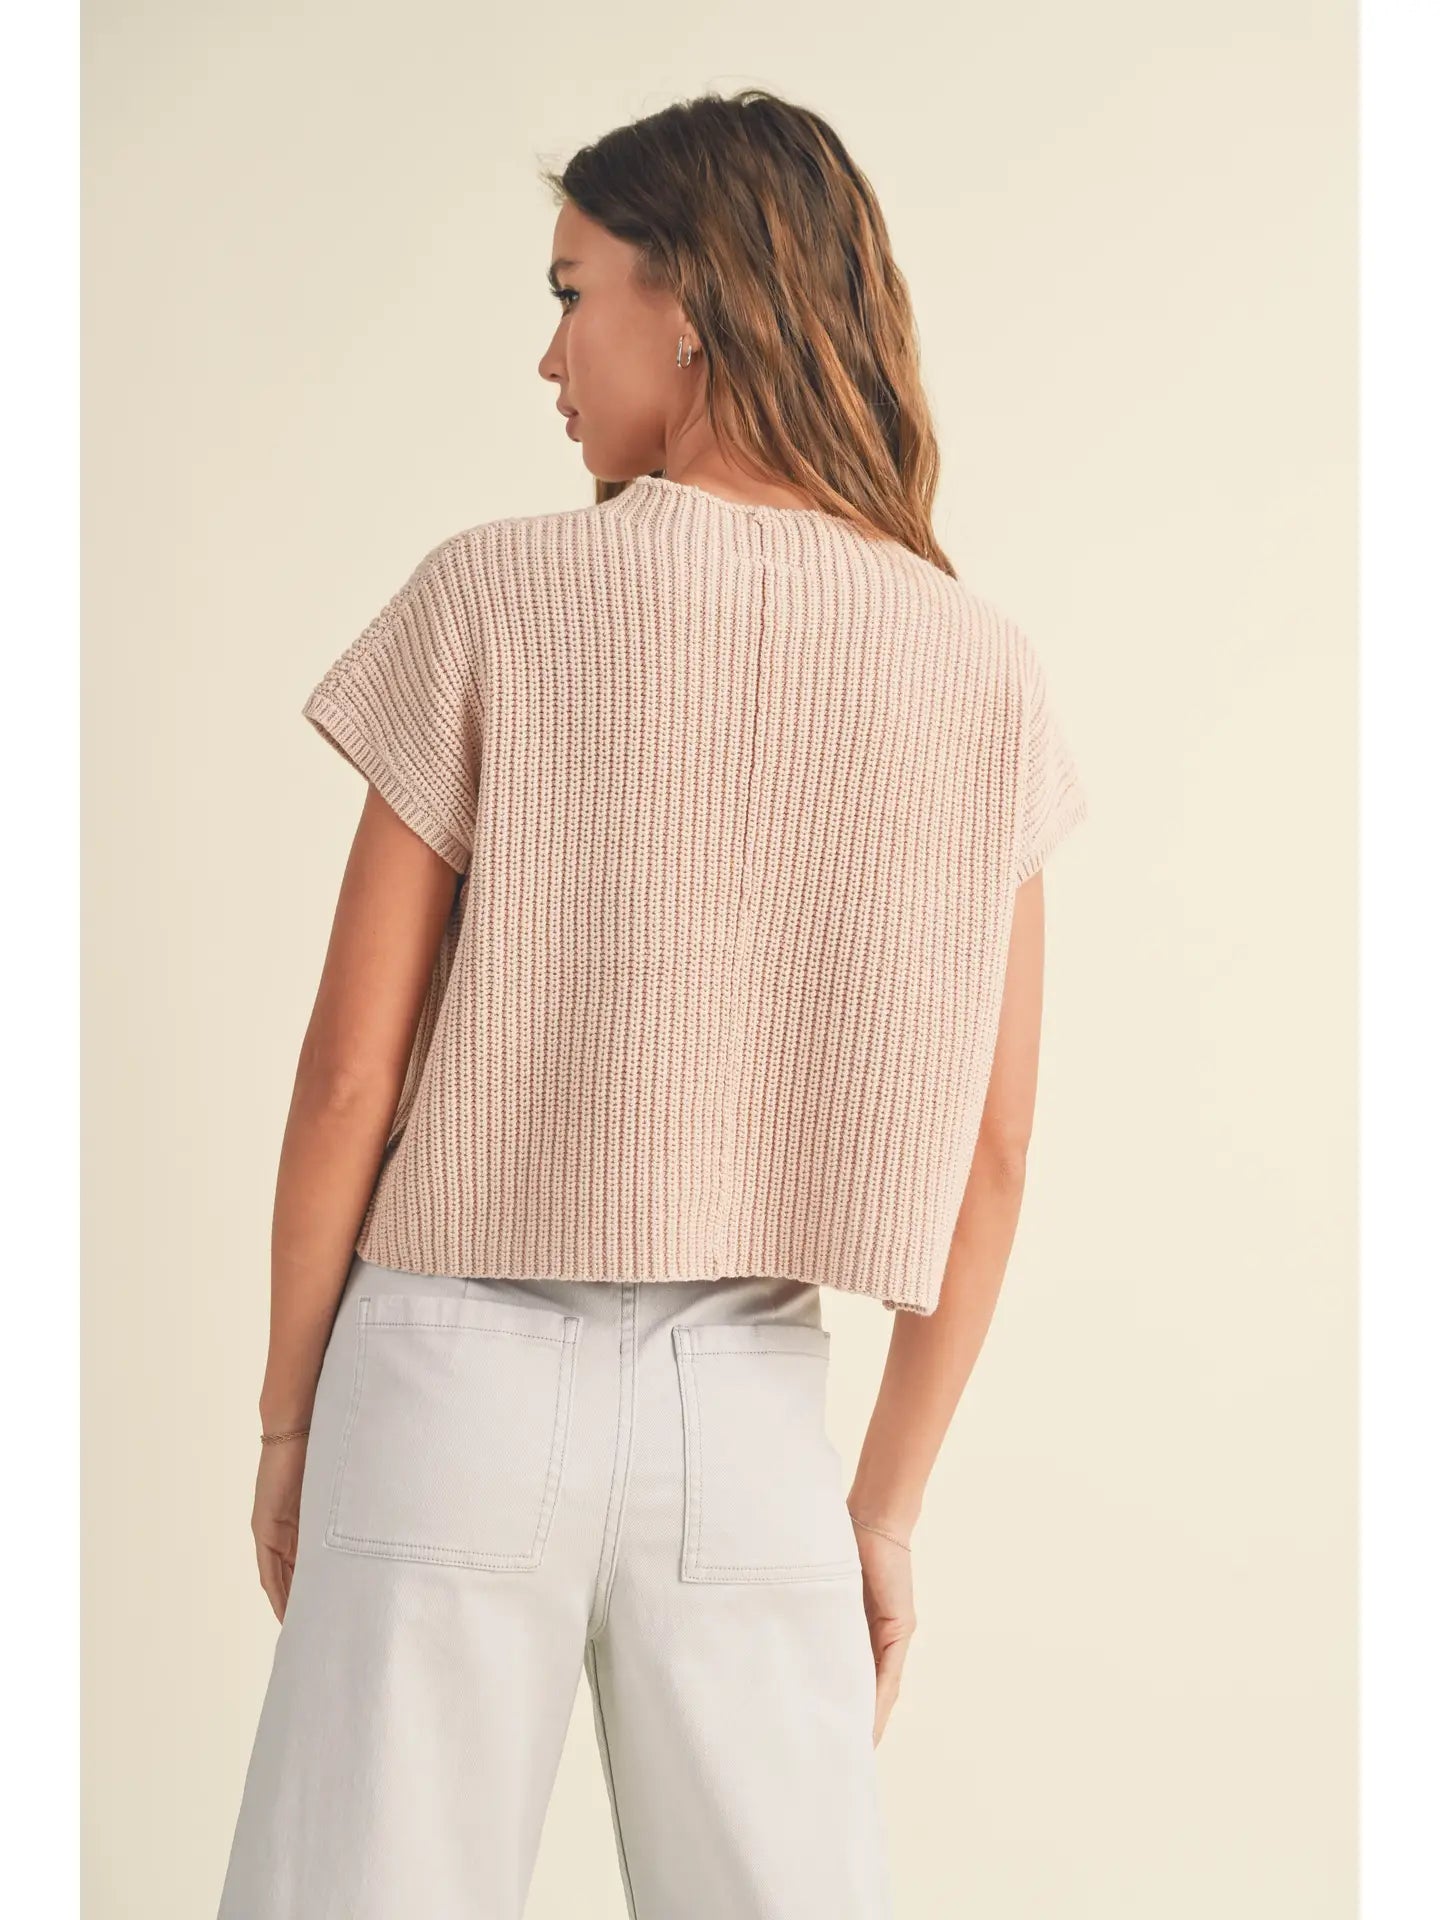 Muse Sweater Knit Top